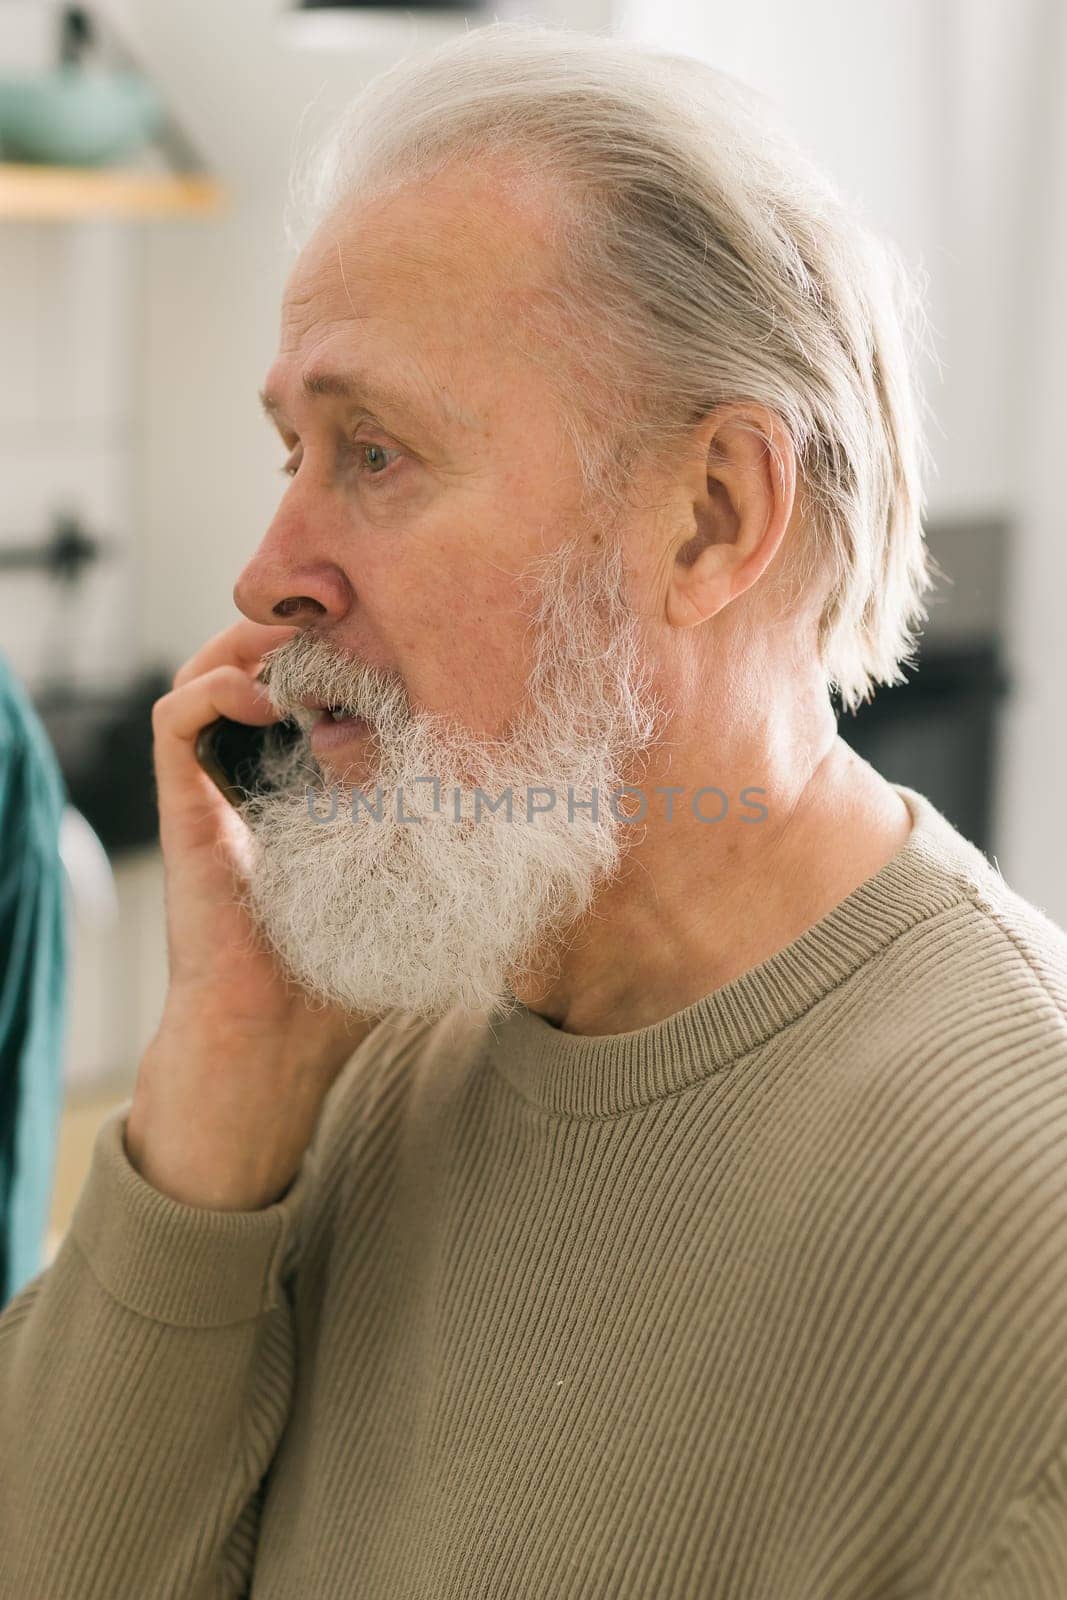 Happy bearded aged senior man talking by phone at home - active senior aged and communication